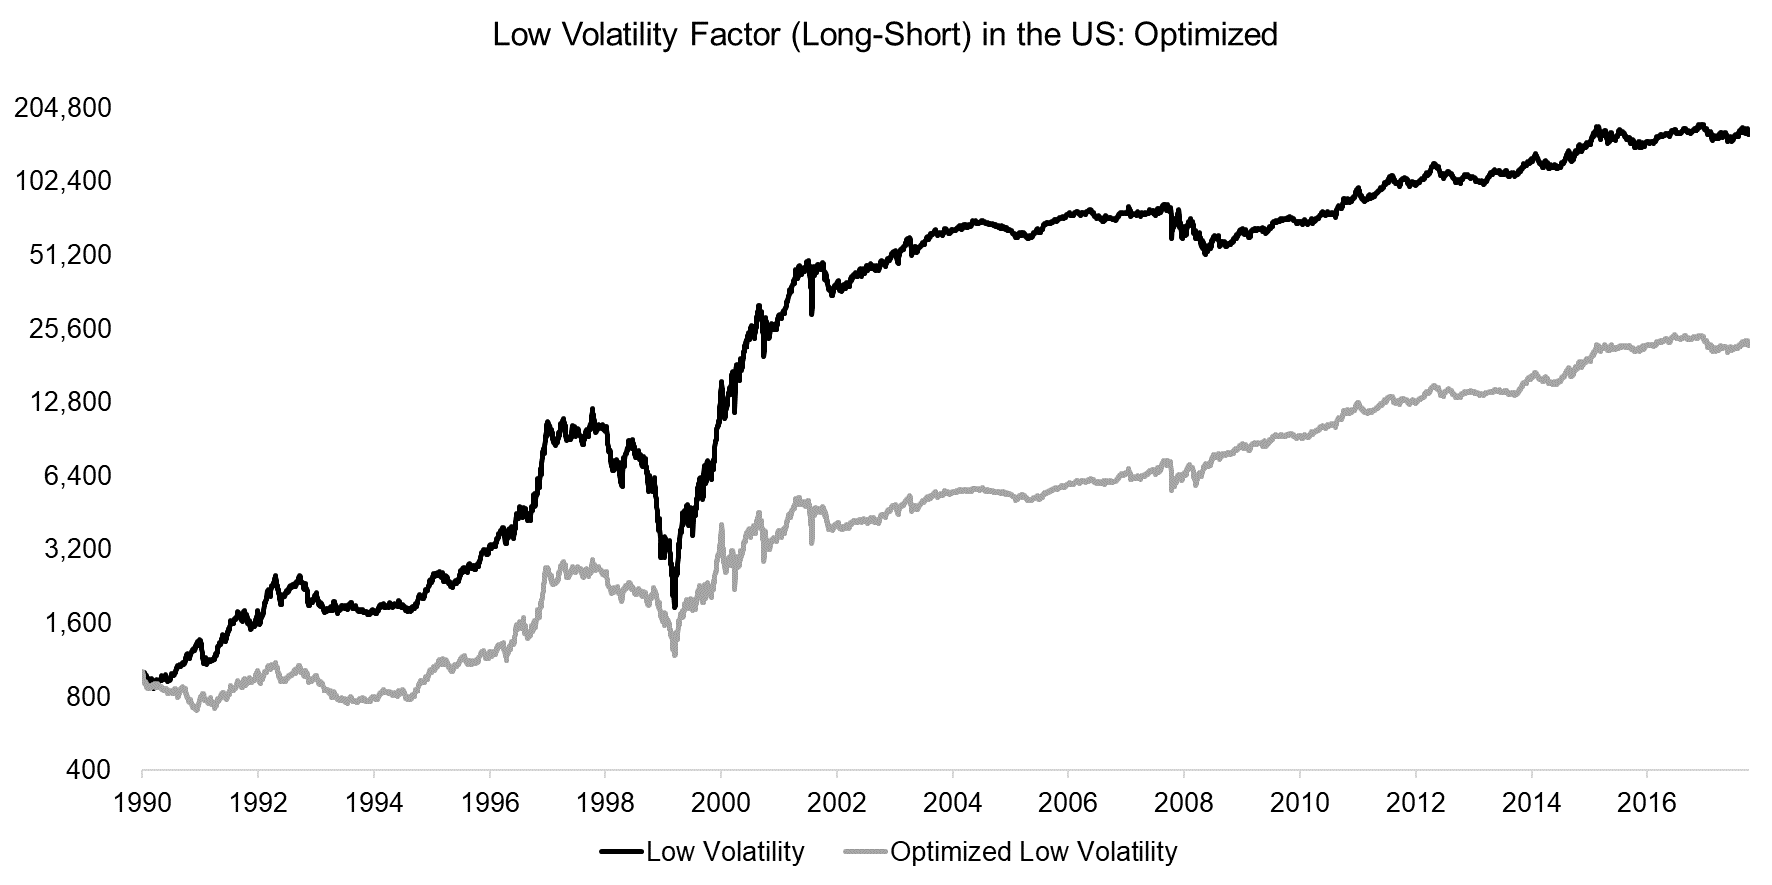 Low Volatility Factor (Long-Short) in the US Optimized